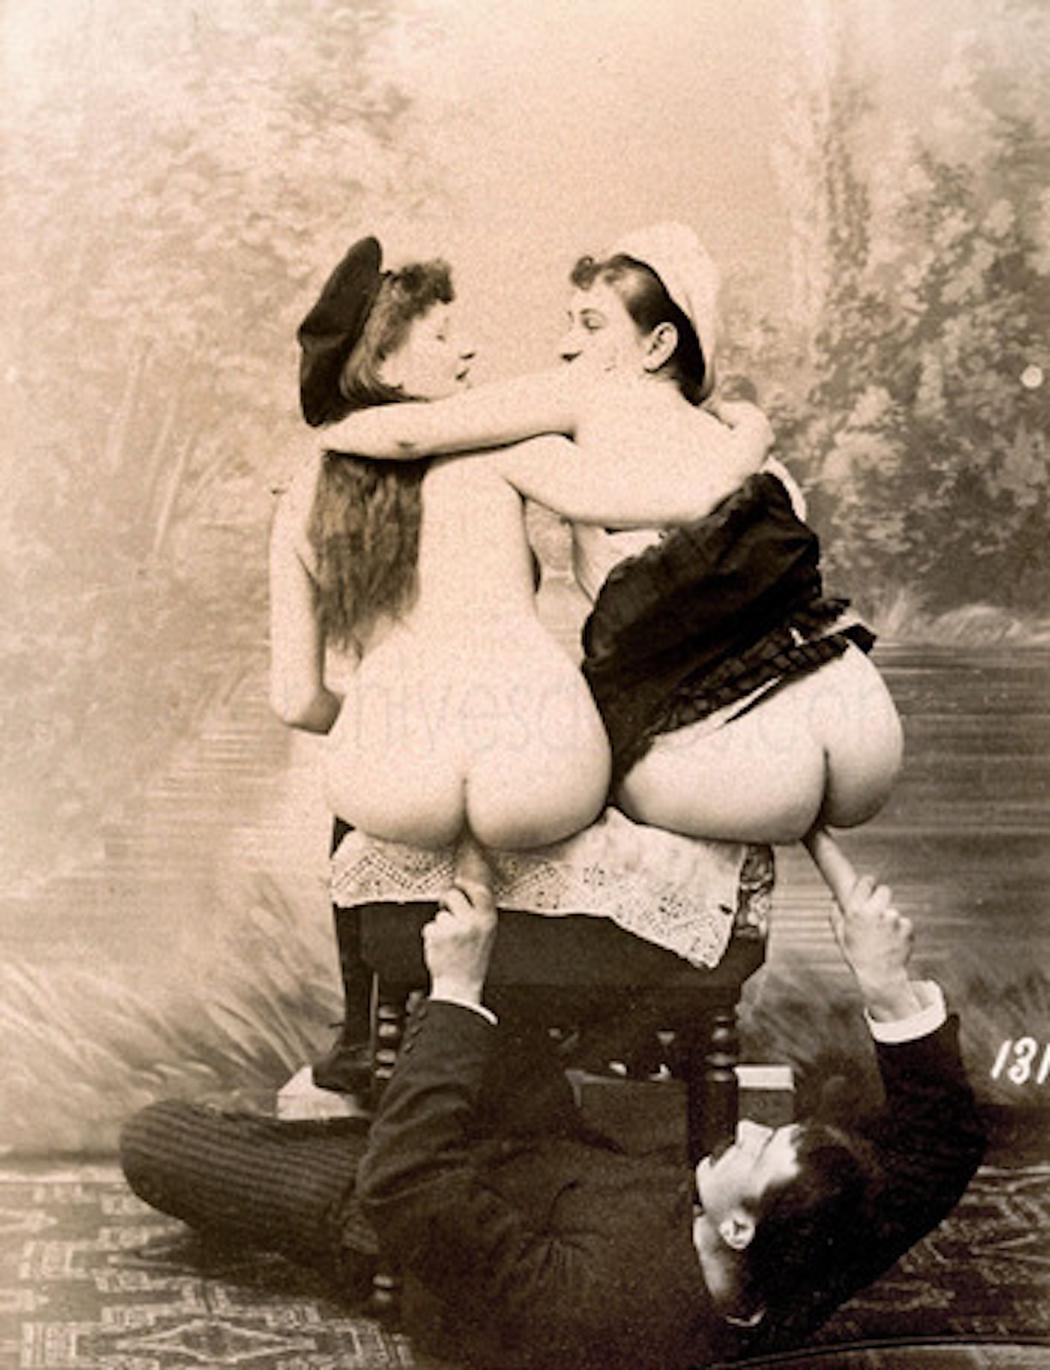 Knee-Buckler recommend best of A history of erotic photography